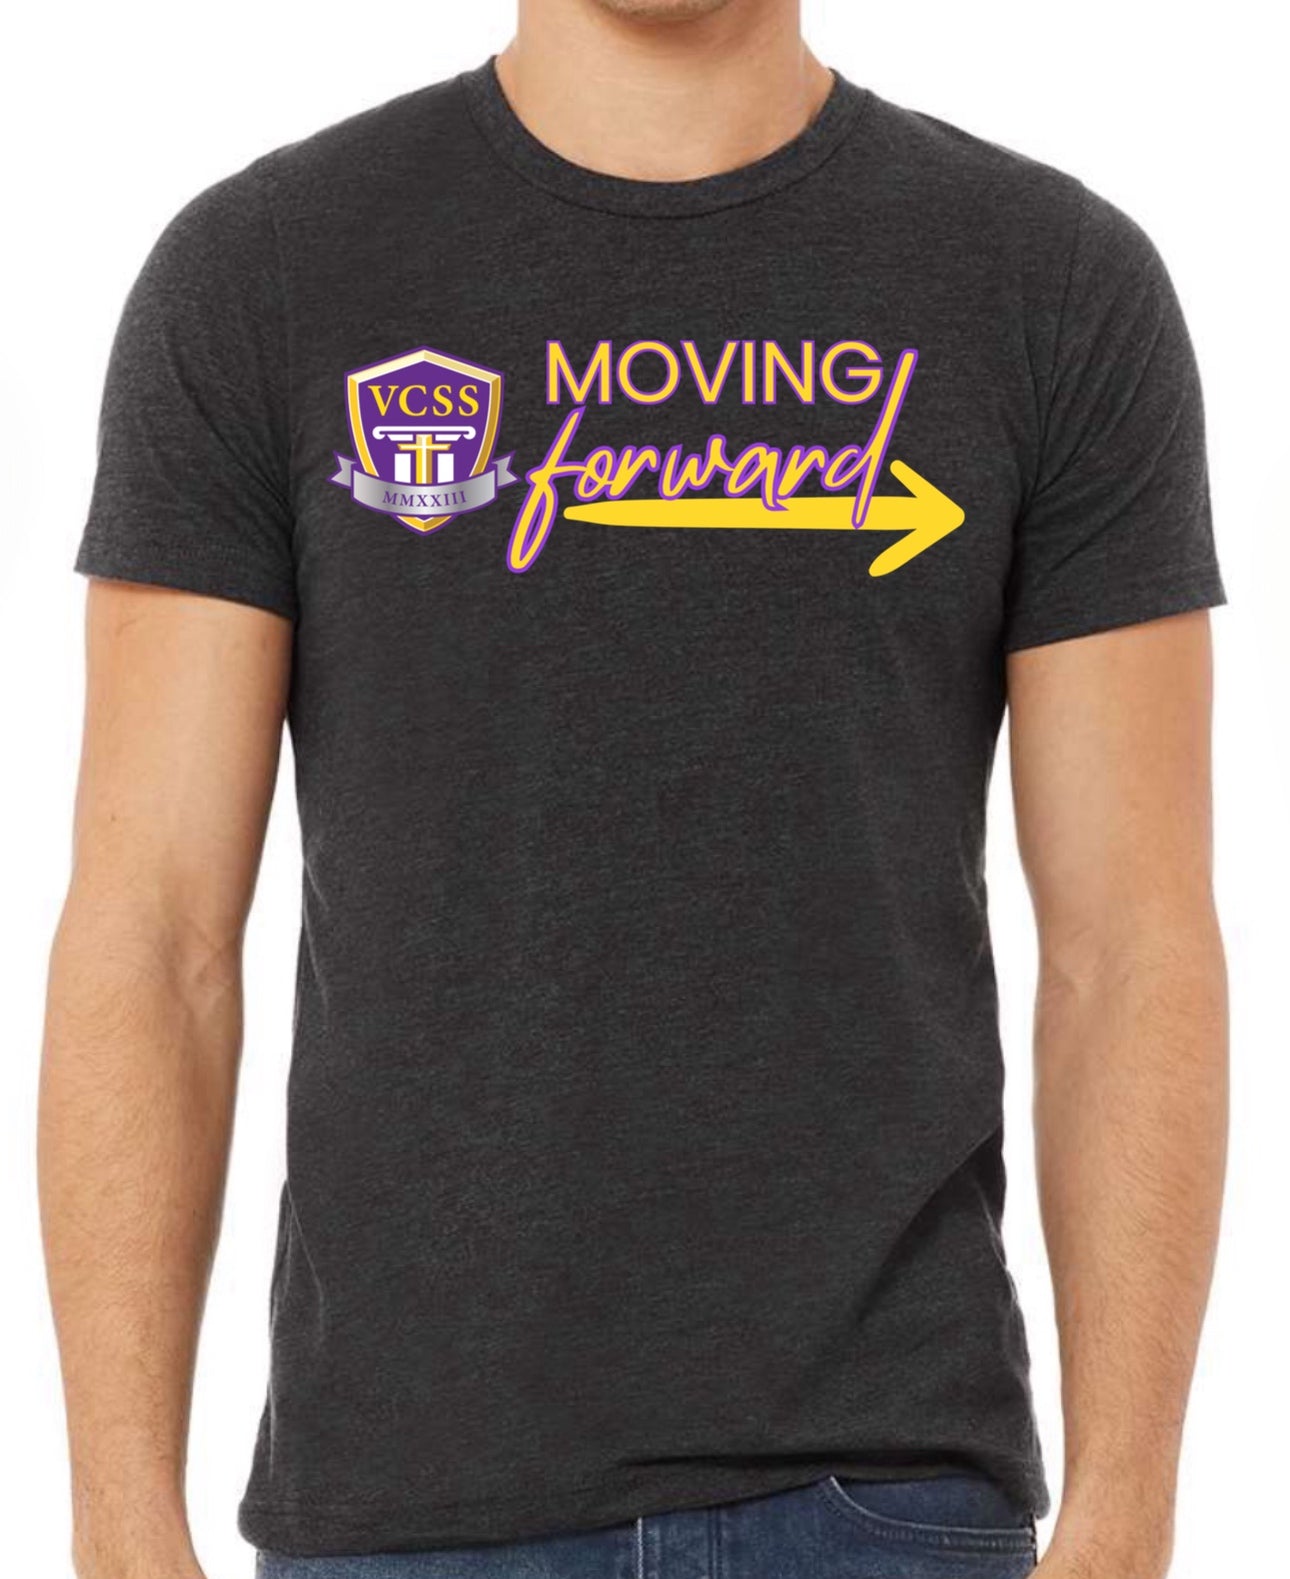 Moving Forward Tee- youth sizes